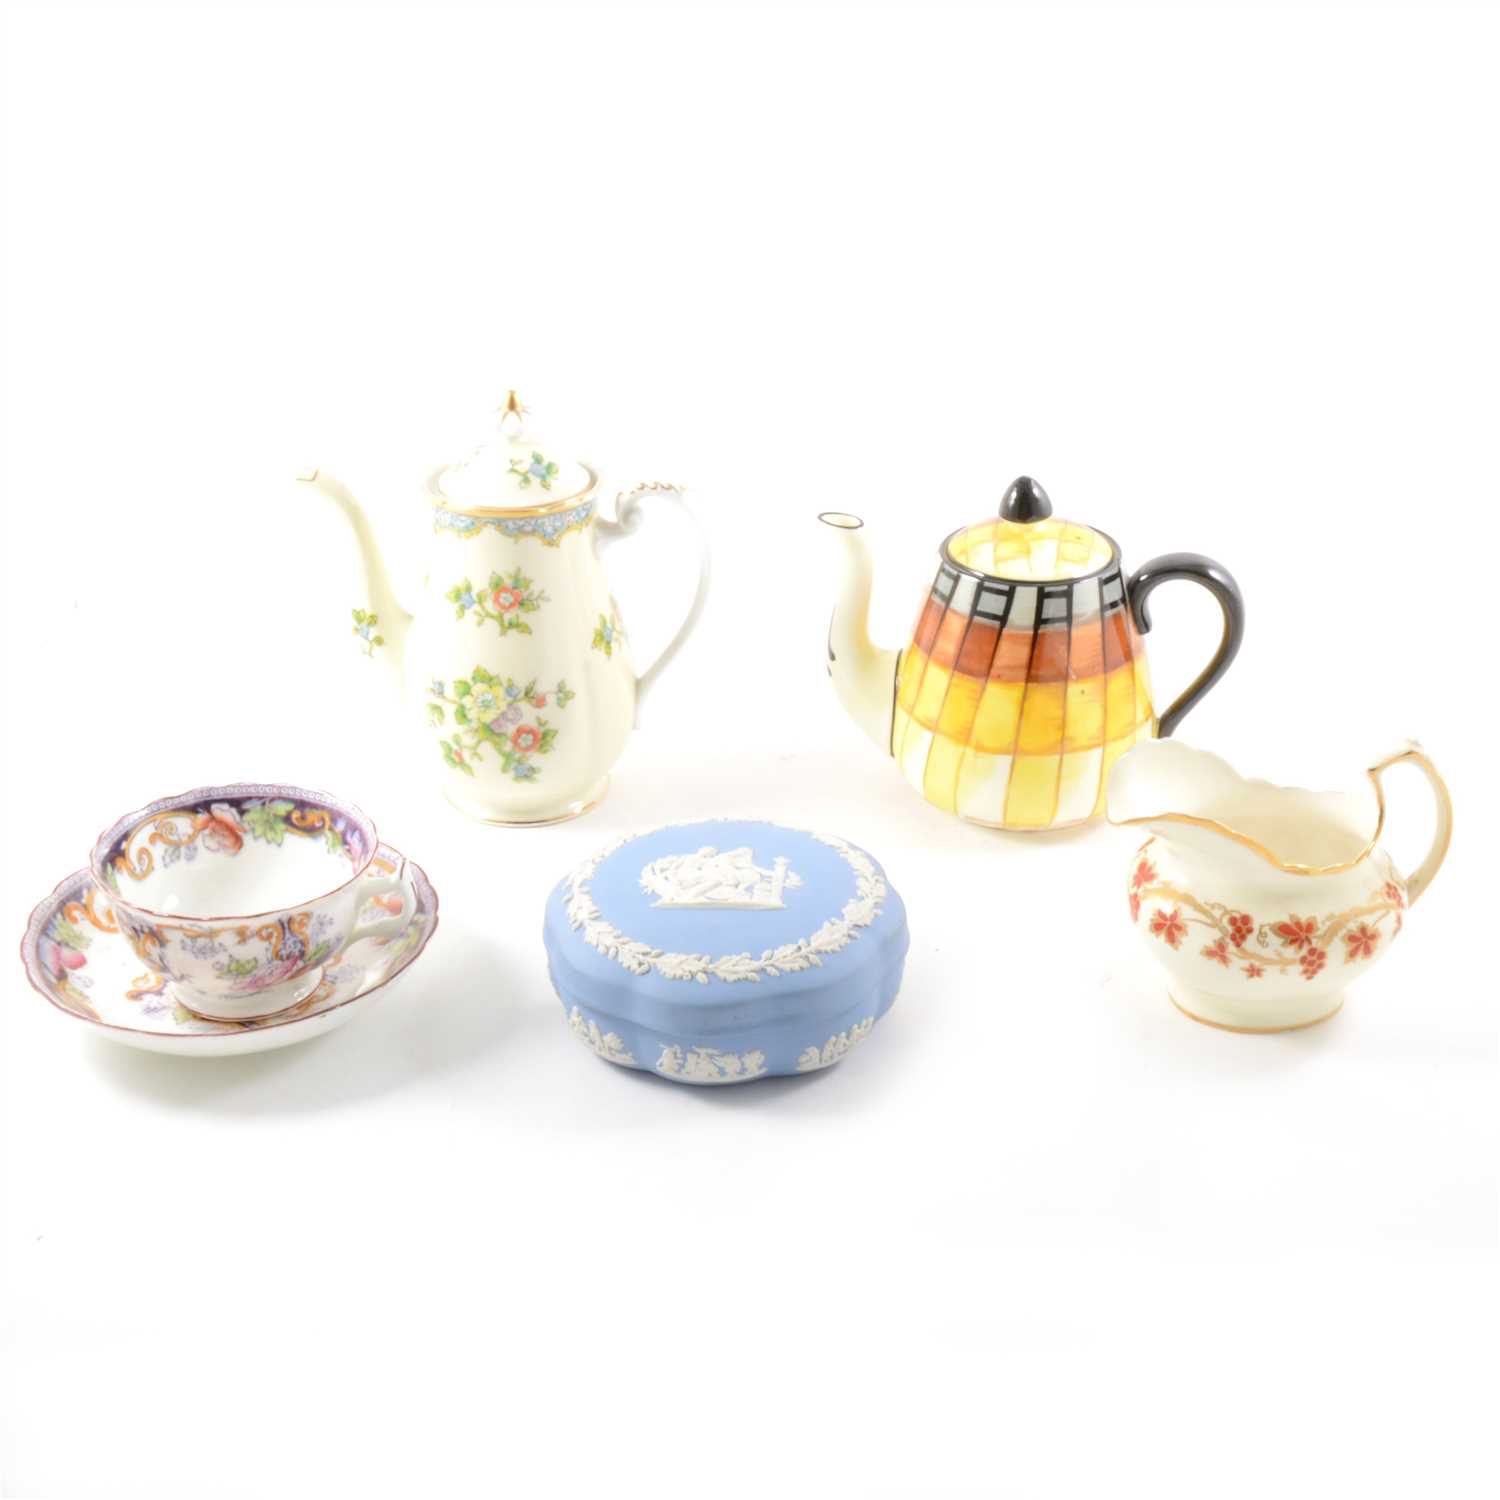 Lot 17 - A large collection of decorative china including tea and coffee ware